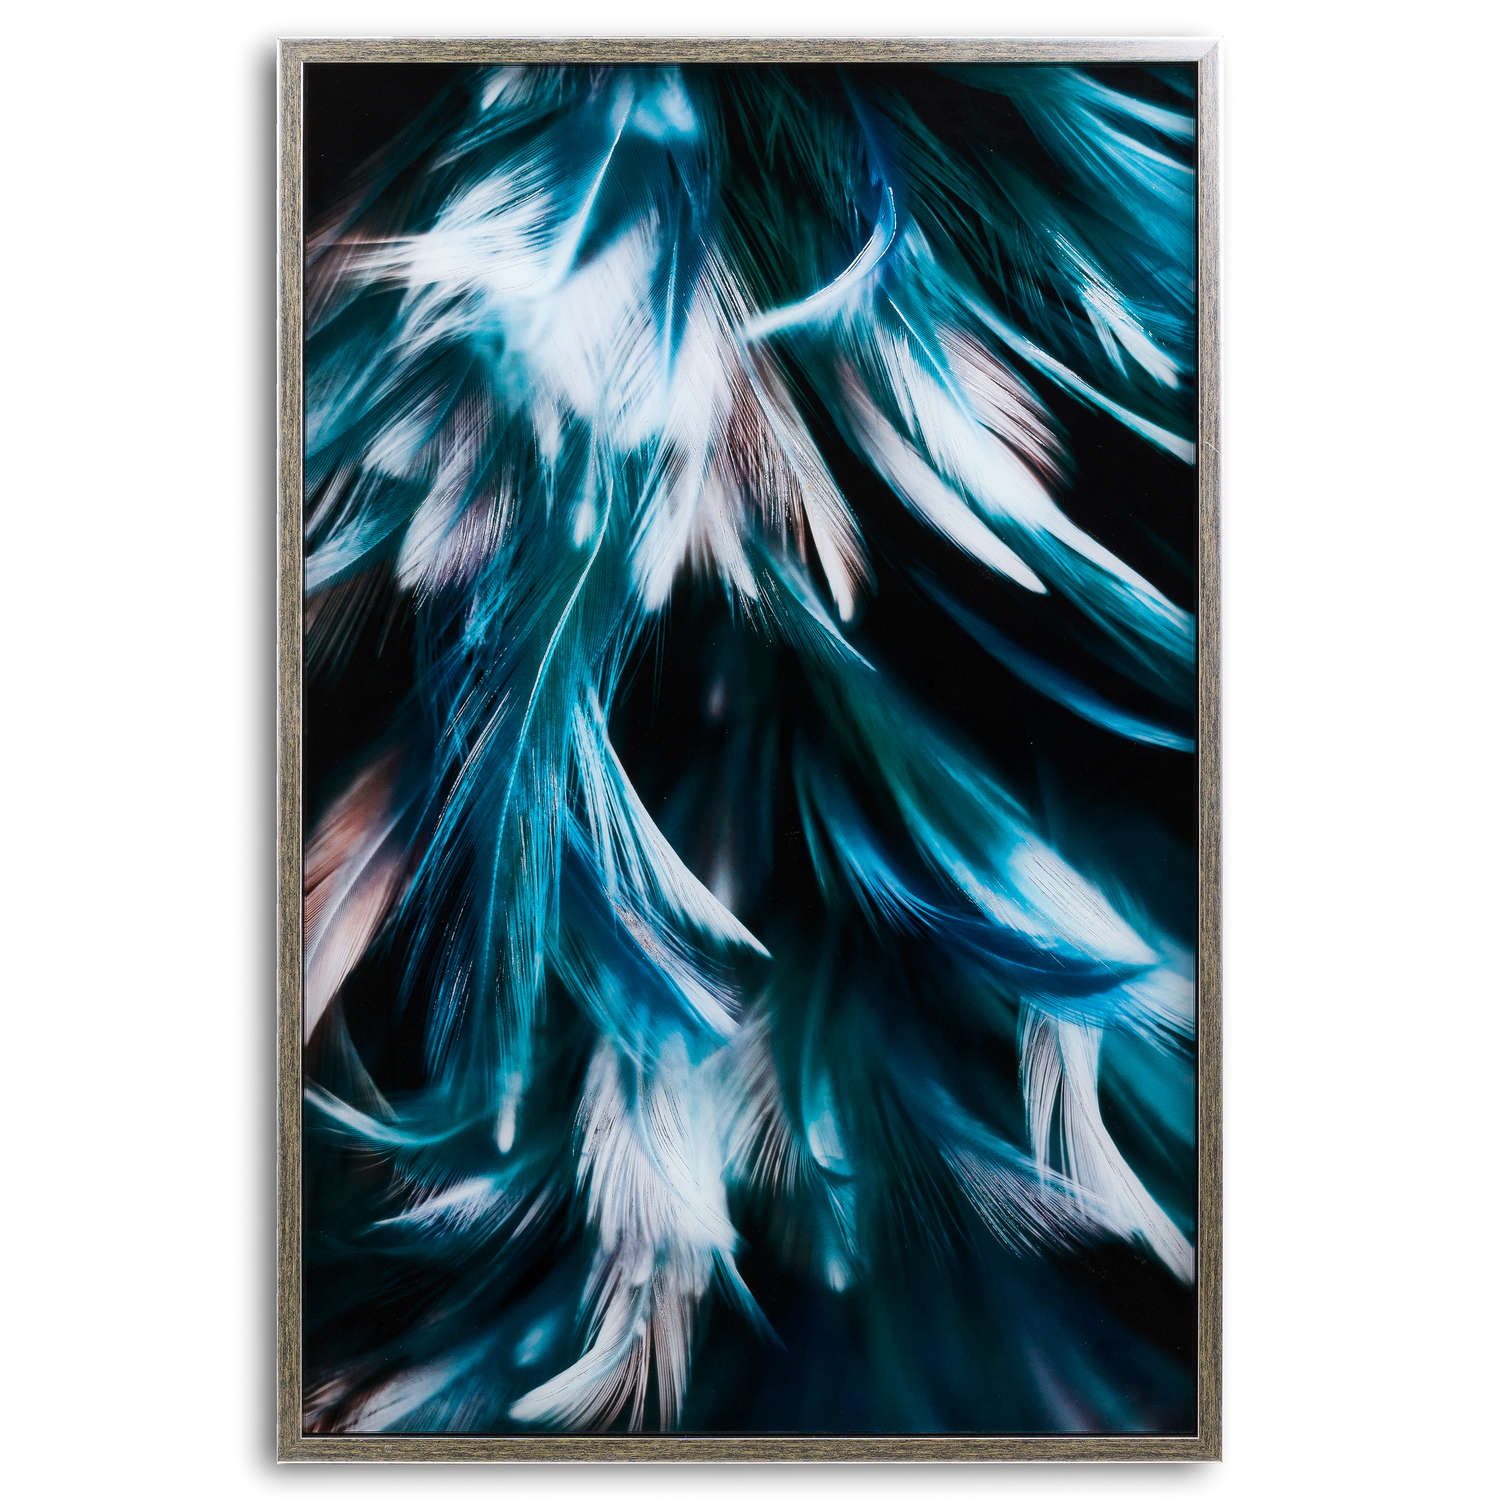 Teal Feather Glass Image In Silver Frame - Image 1